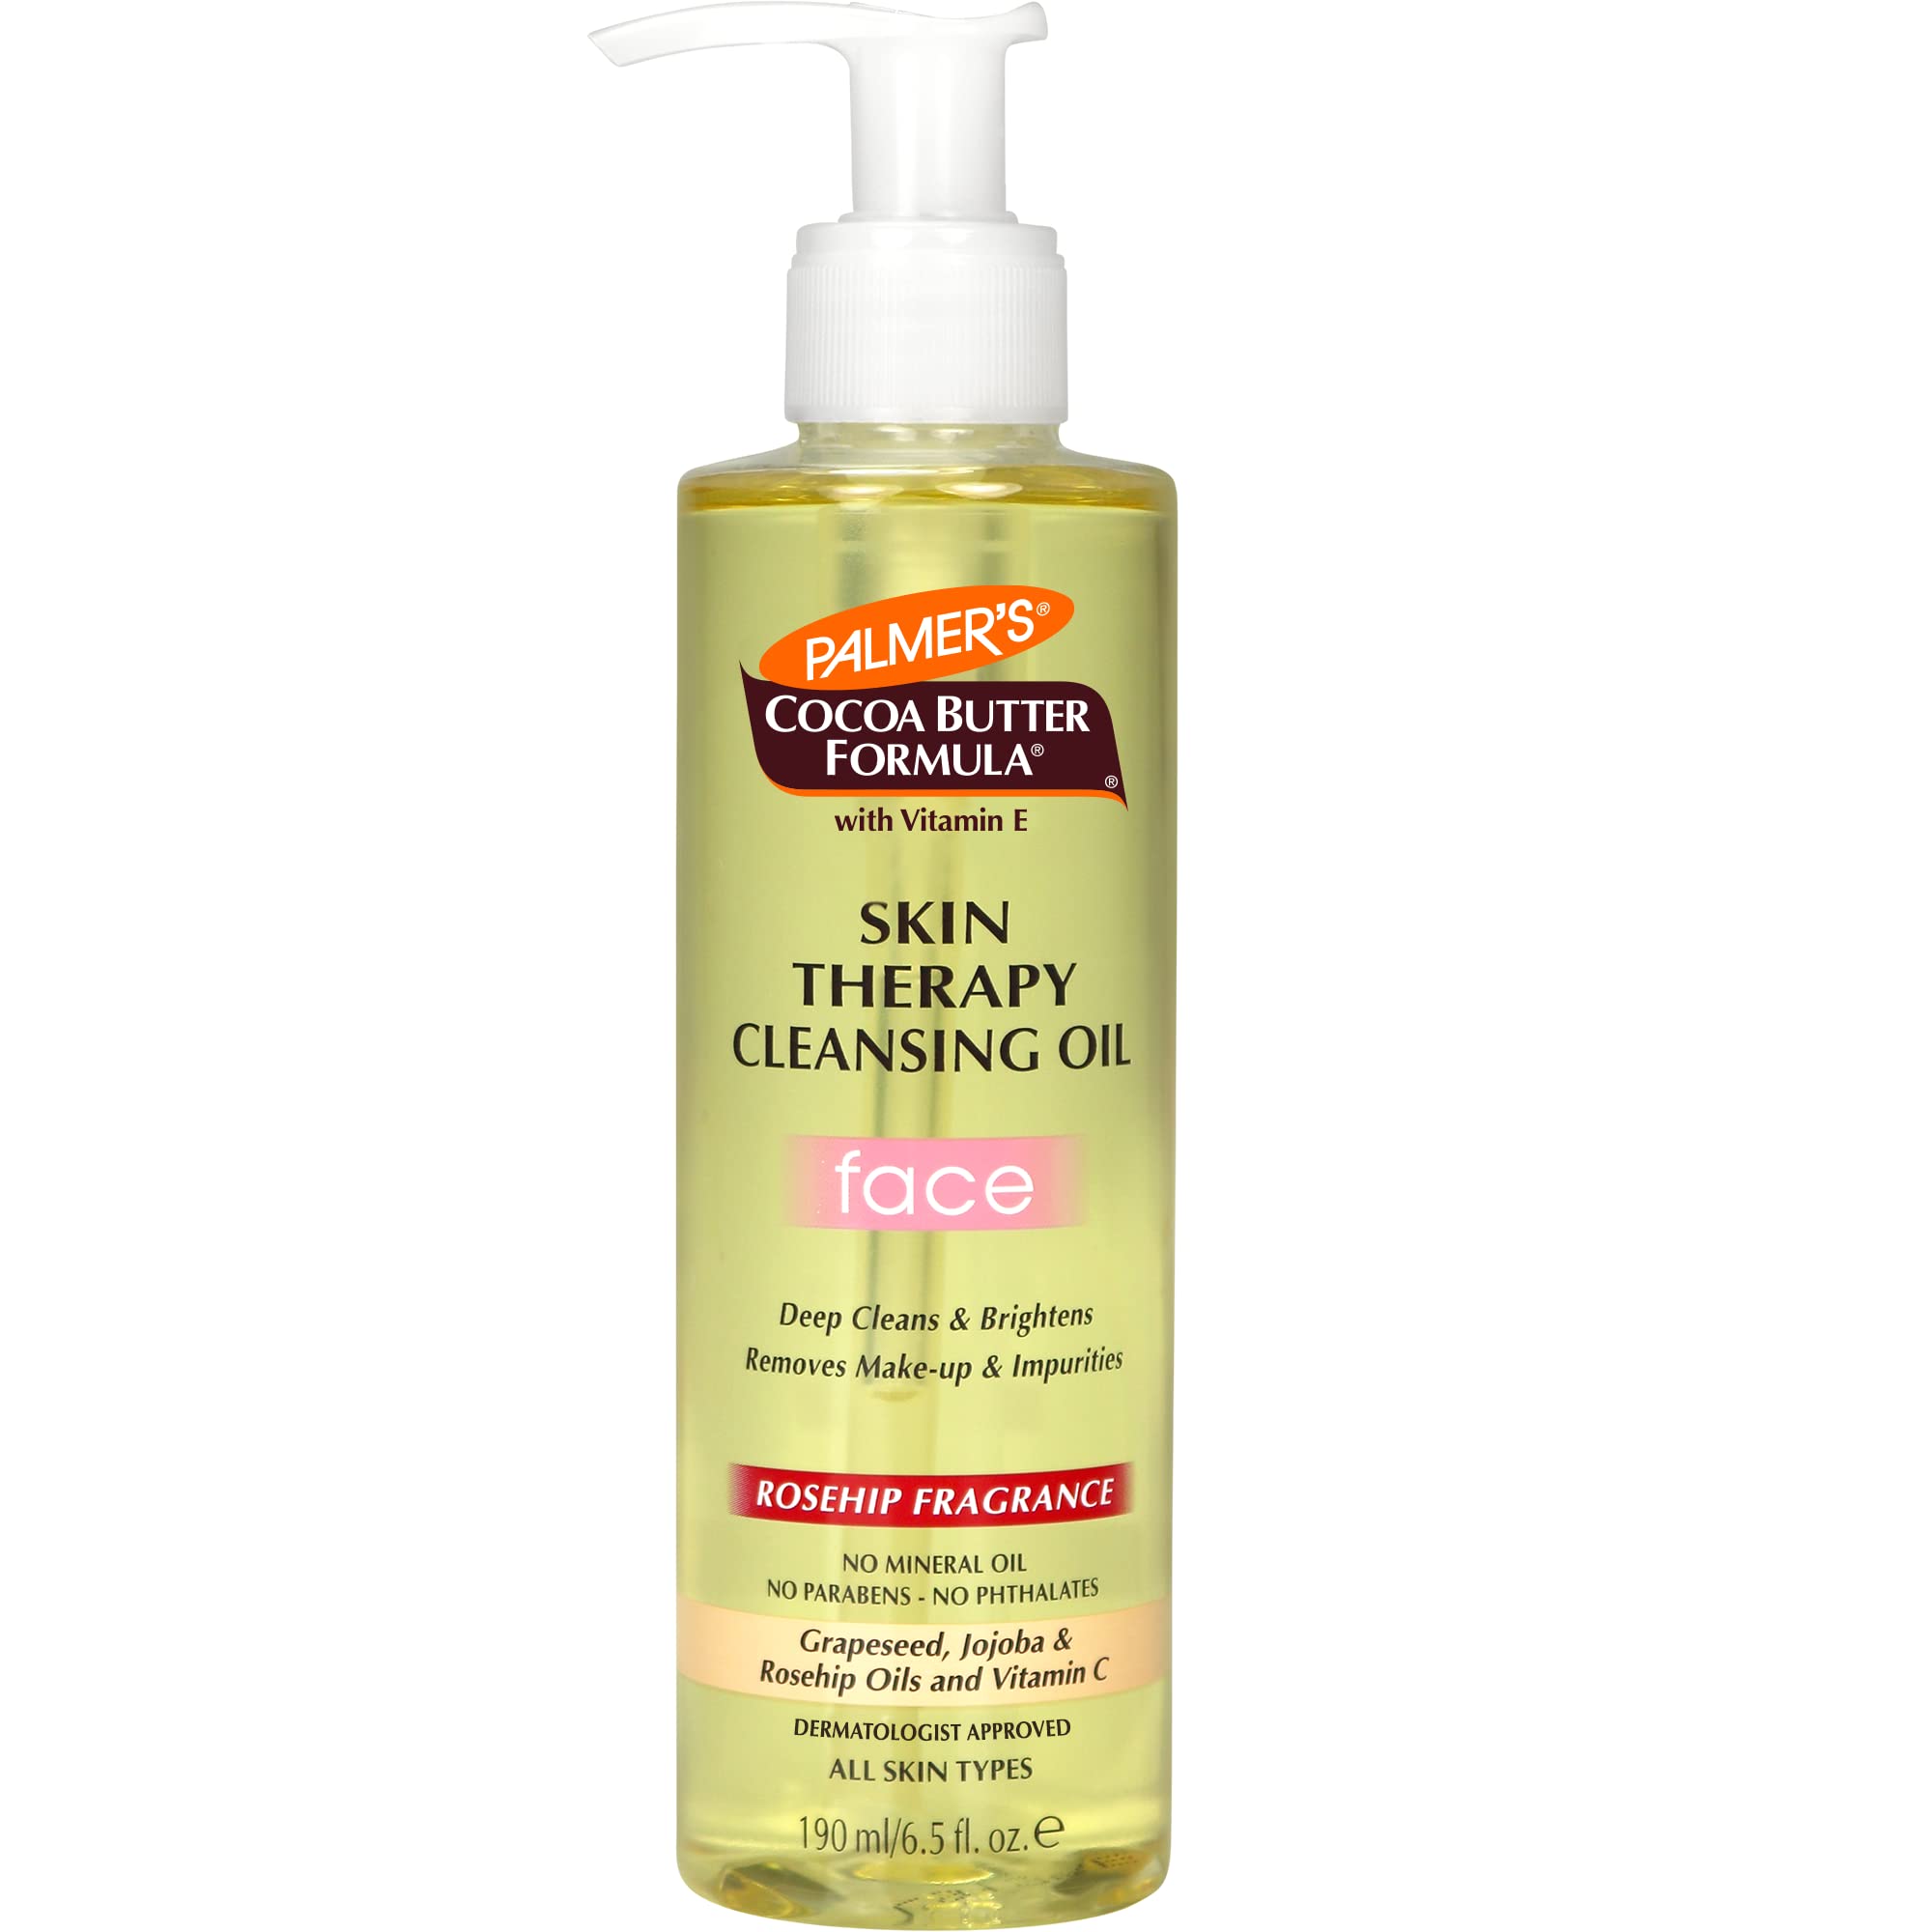 Palmer's Cocoa Butter Skin Therapy Cleansing Facial Oil, Gentle